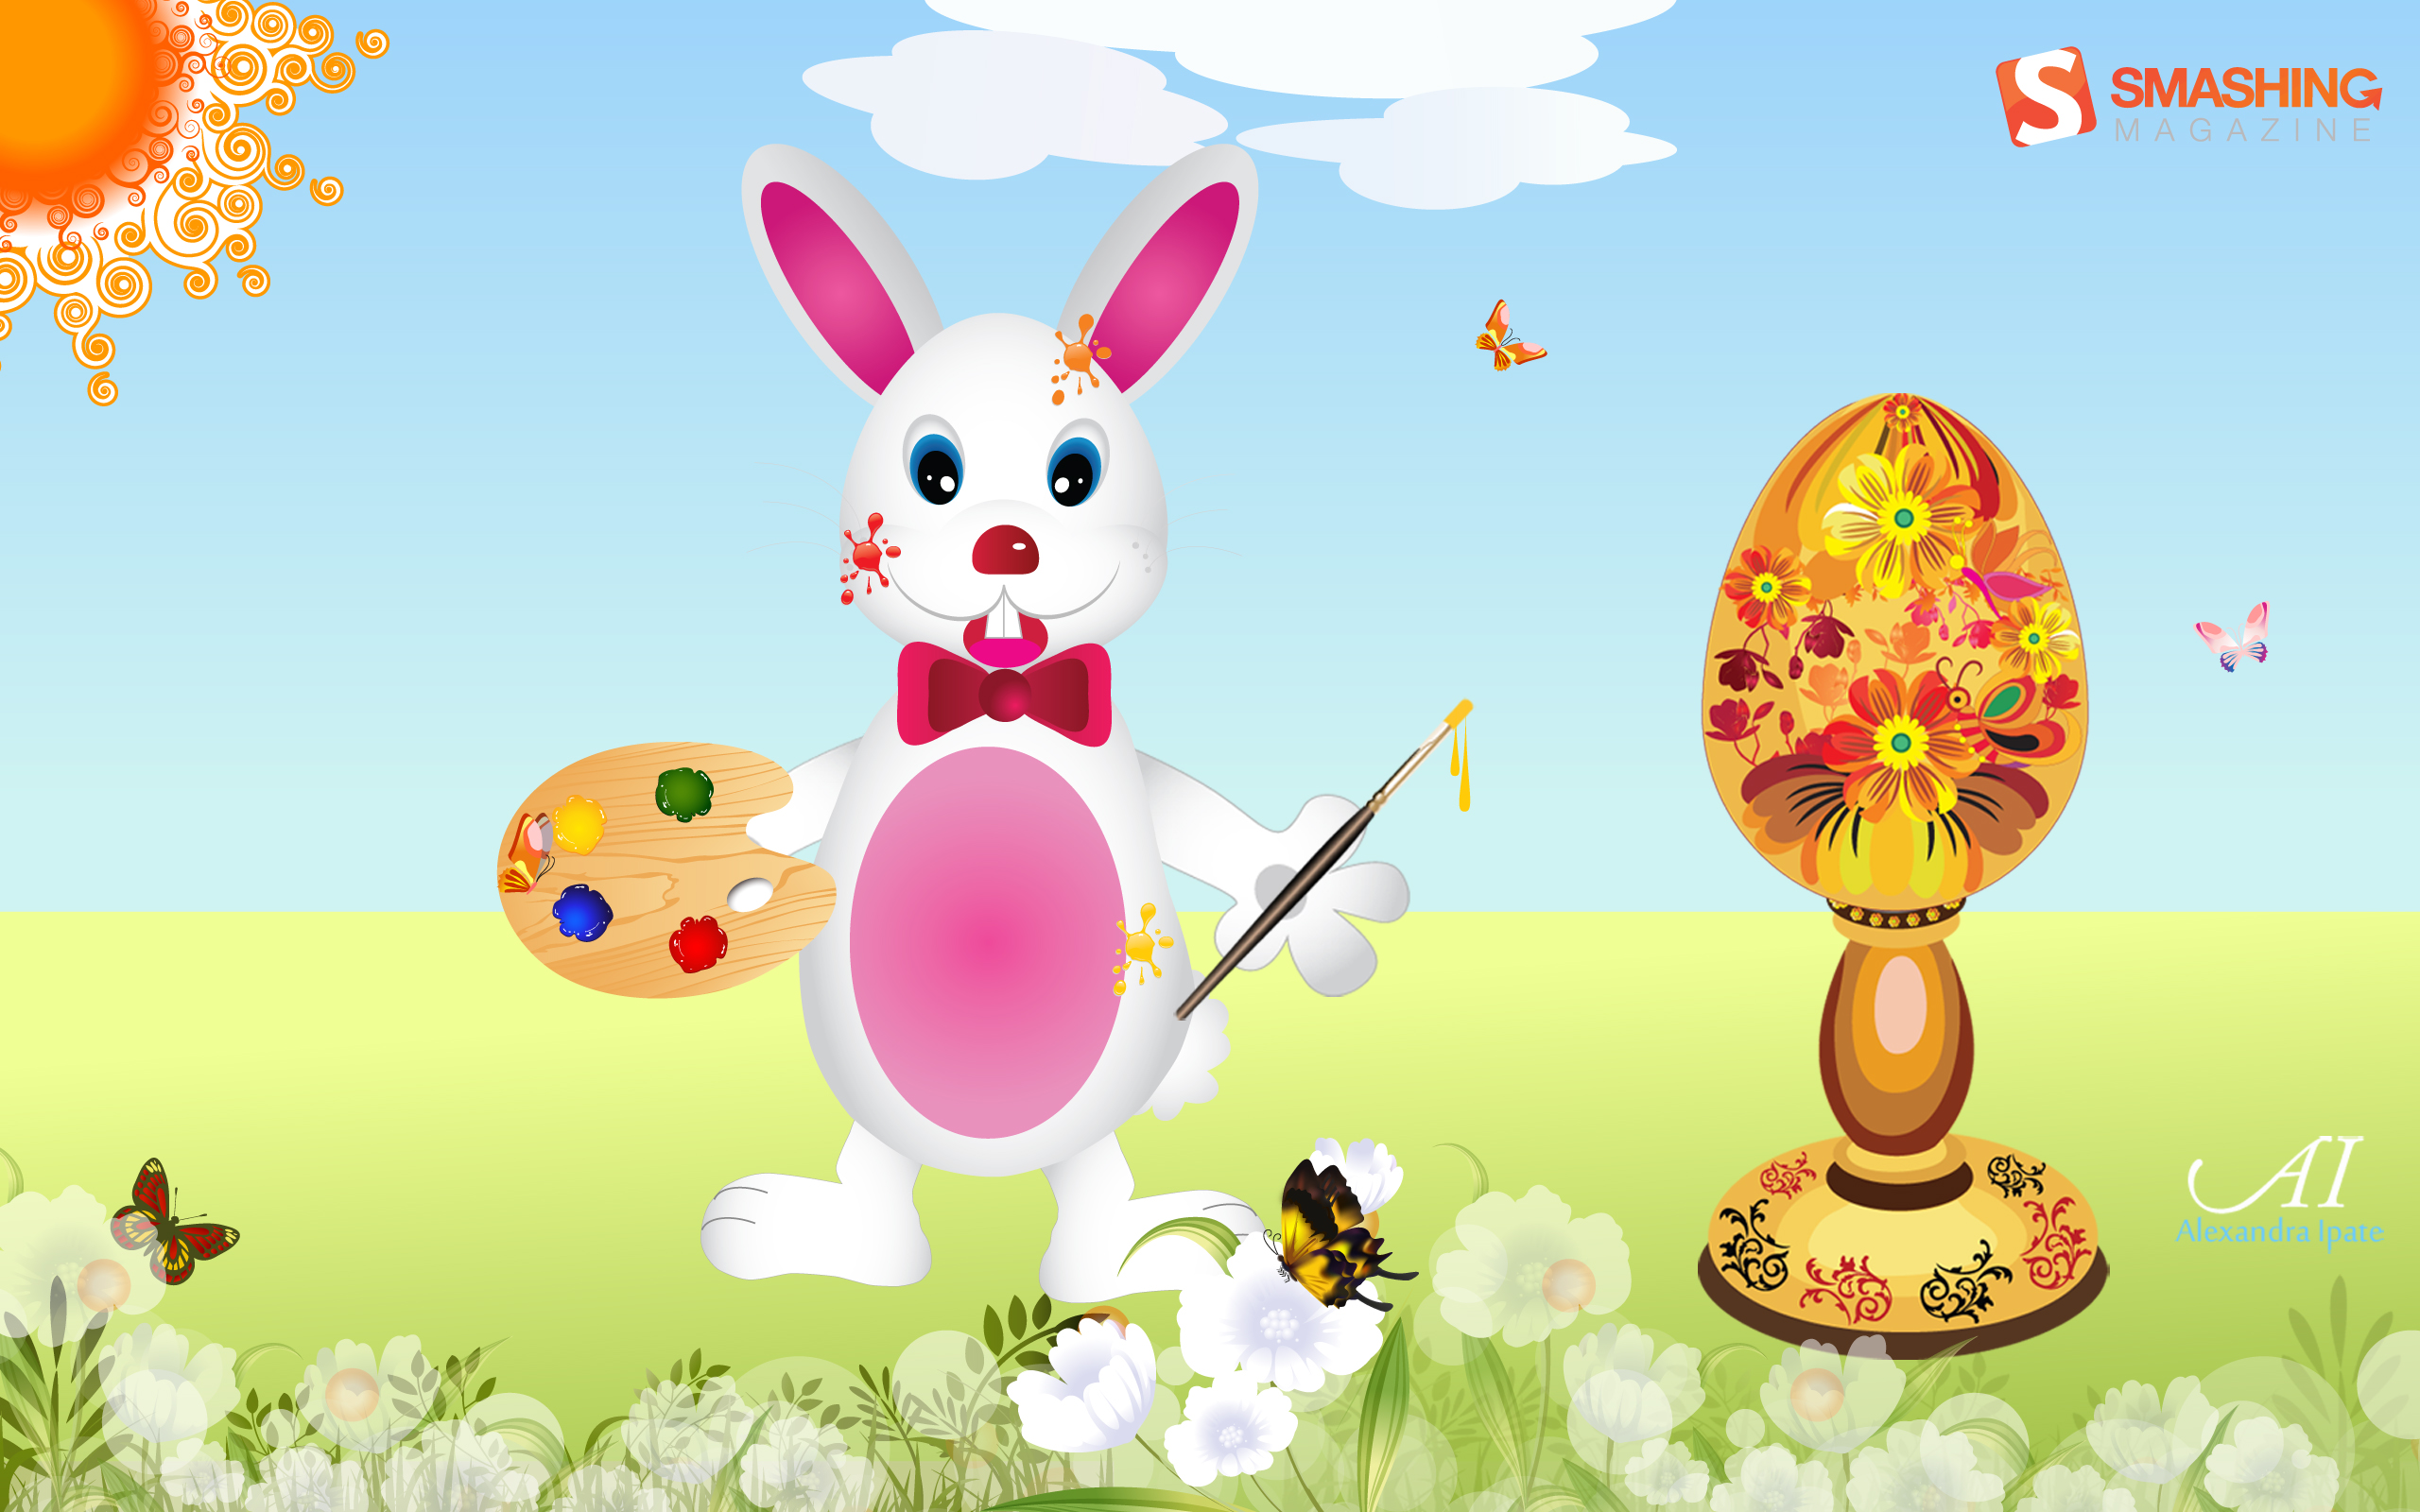 Joyful Easter Wallpaper Funny Bunnies And Painted Eggs